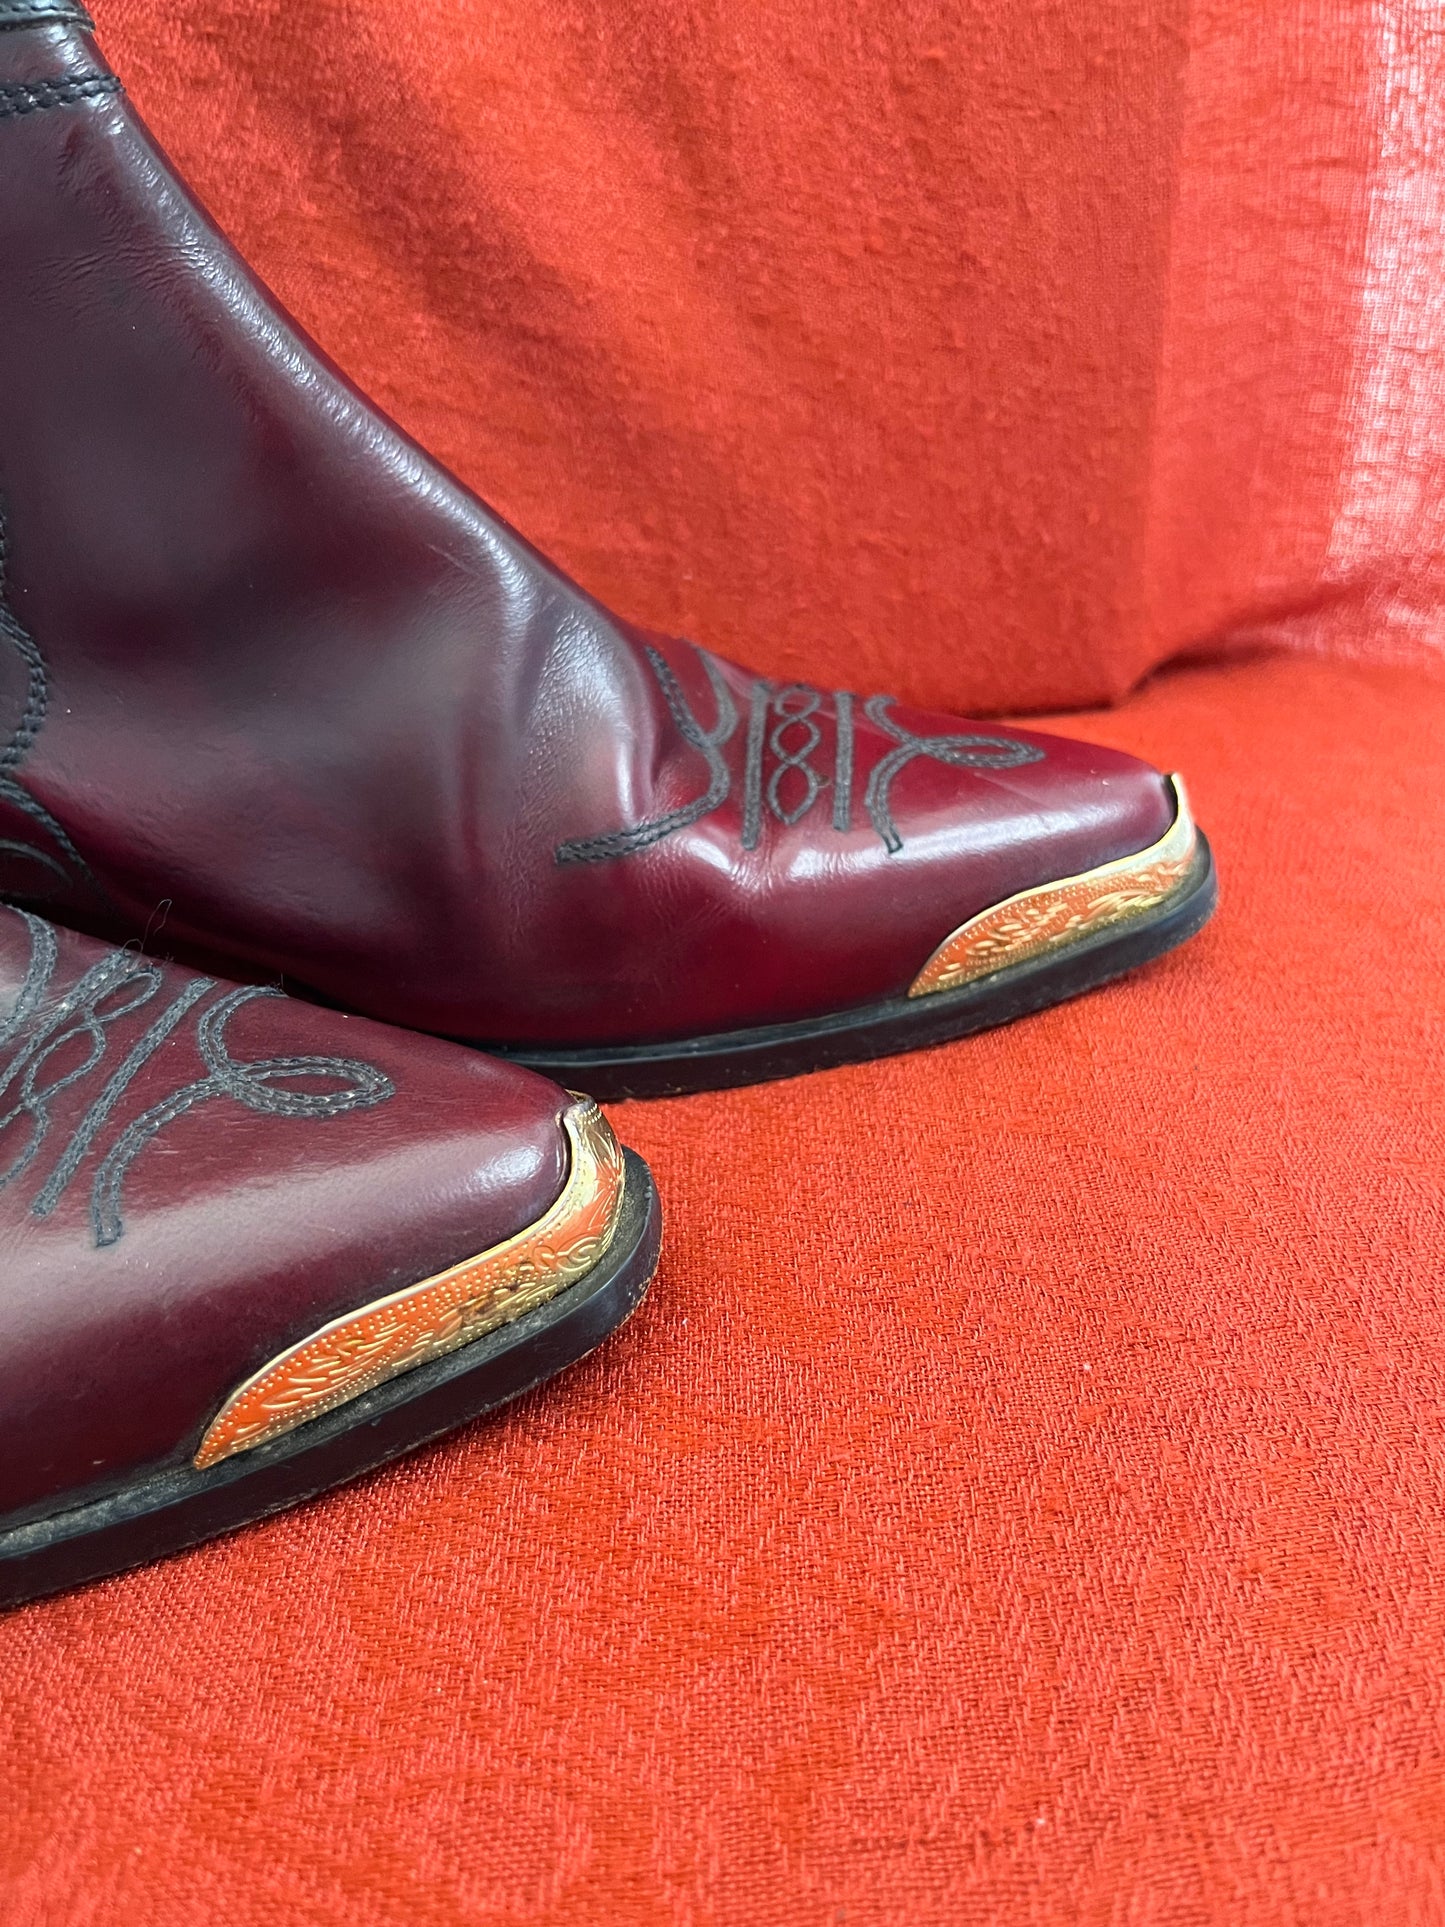 Pollini Hecho En Chilé Burgundy Leather Ankle Boots with Gold Tone Accents Size 39.5 (9 US)